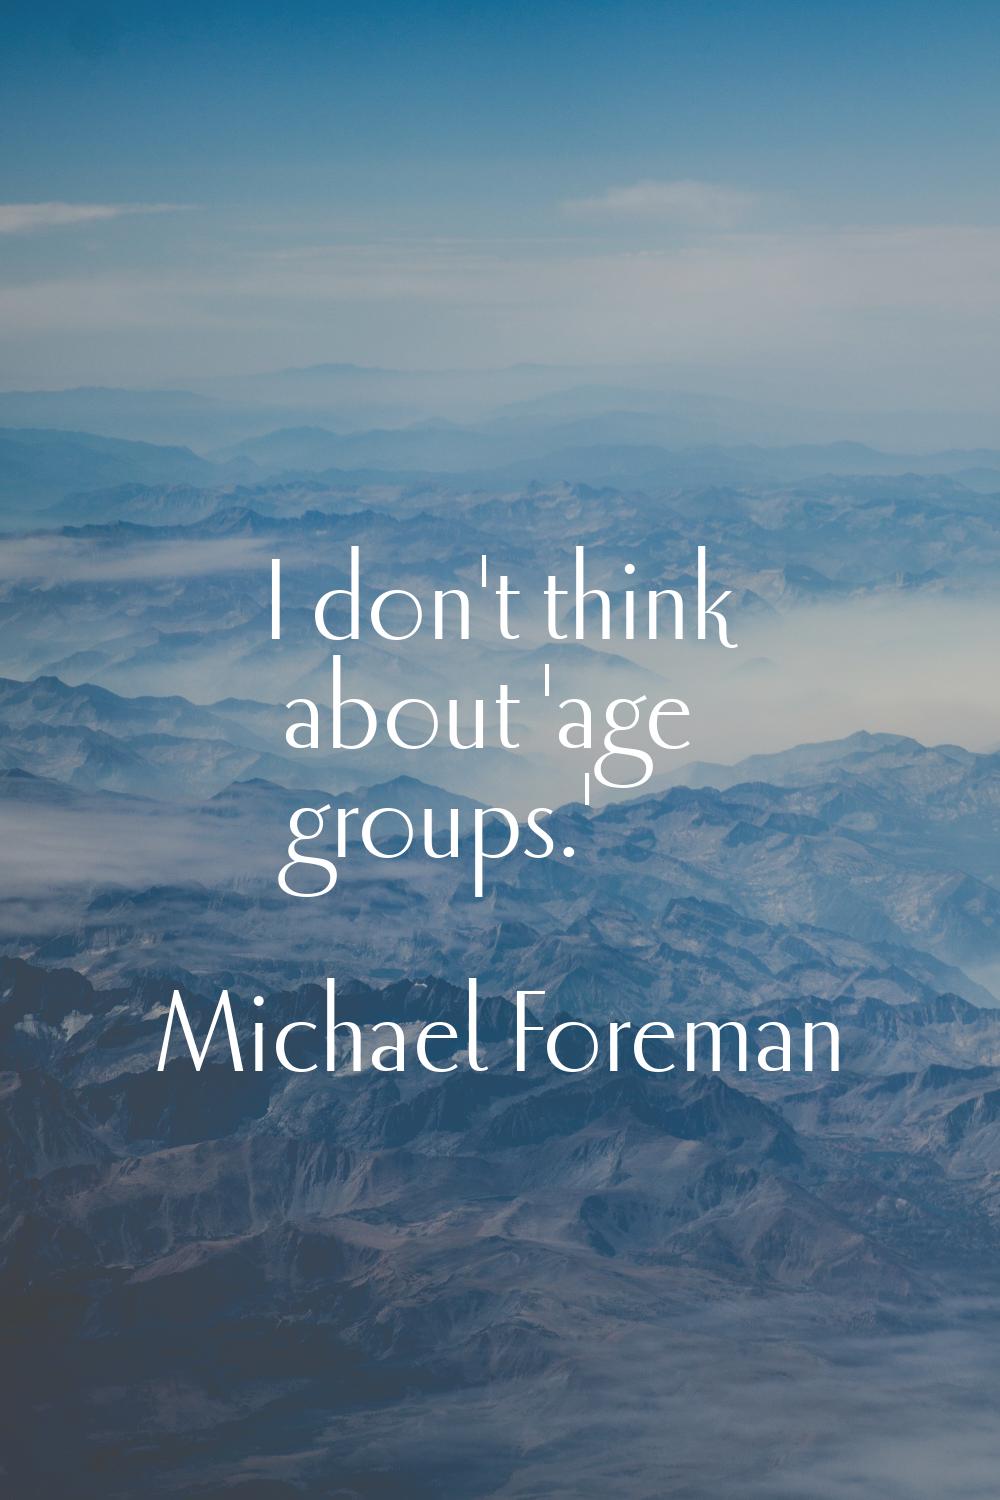 I don't think about 'age groups.'